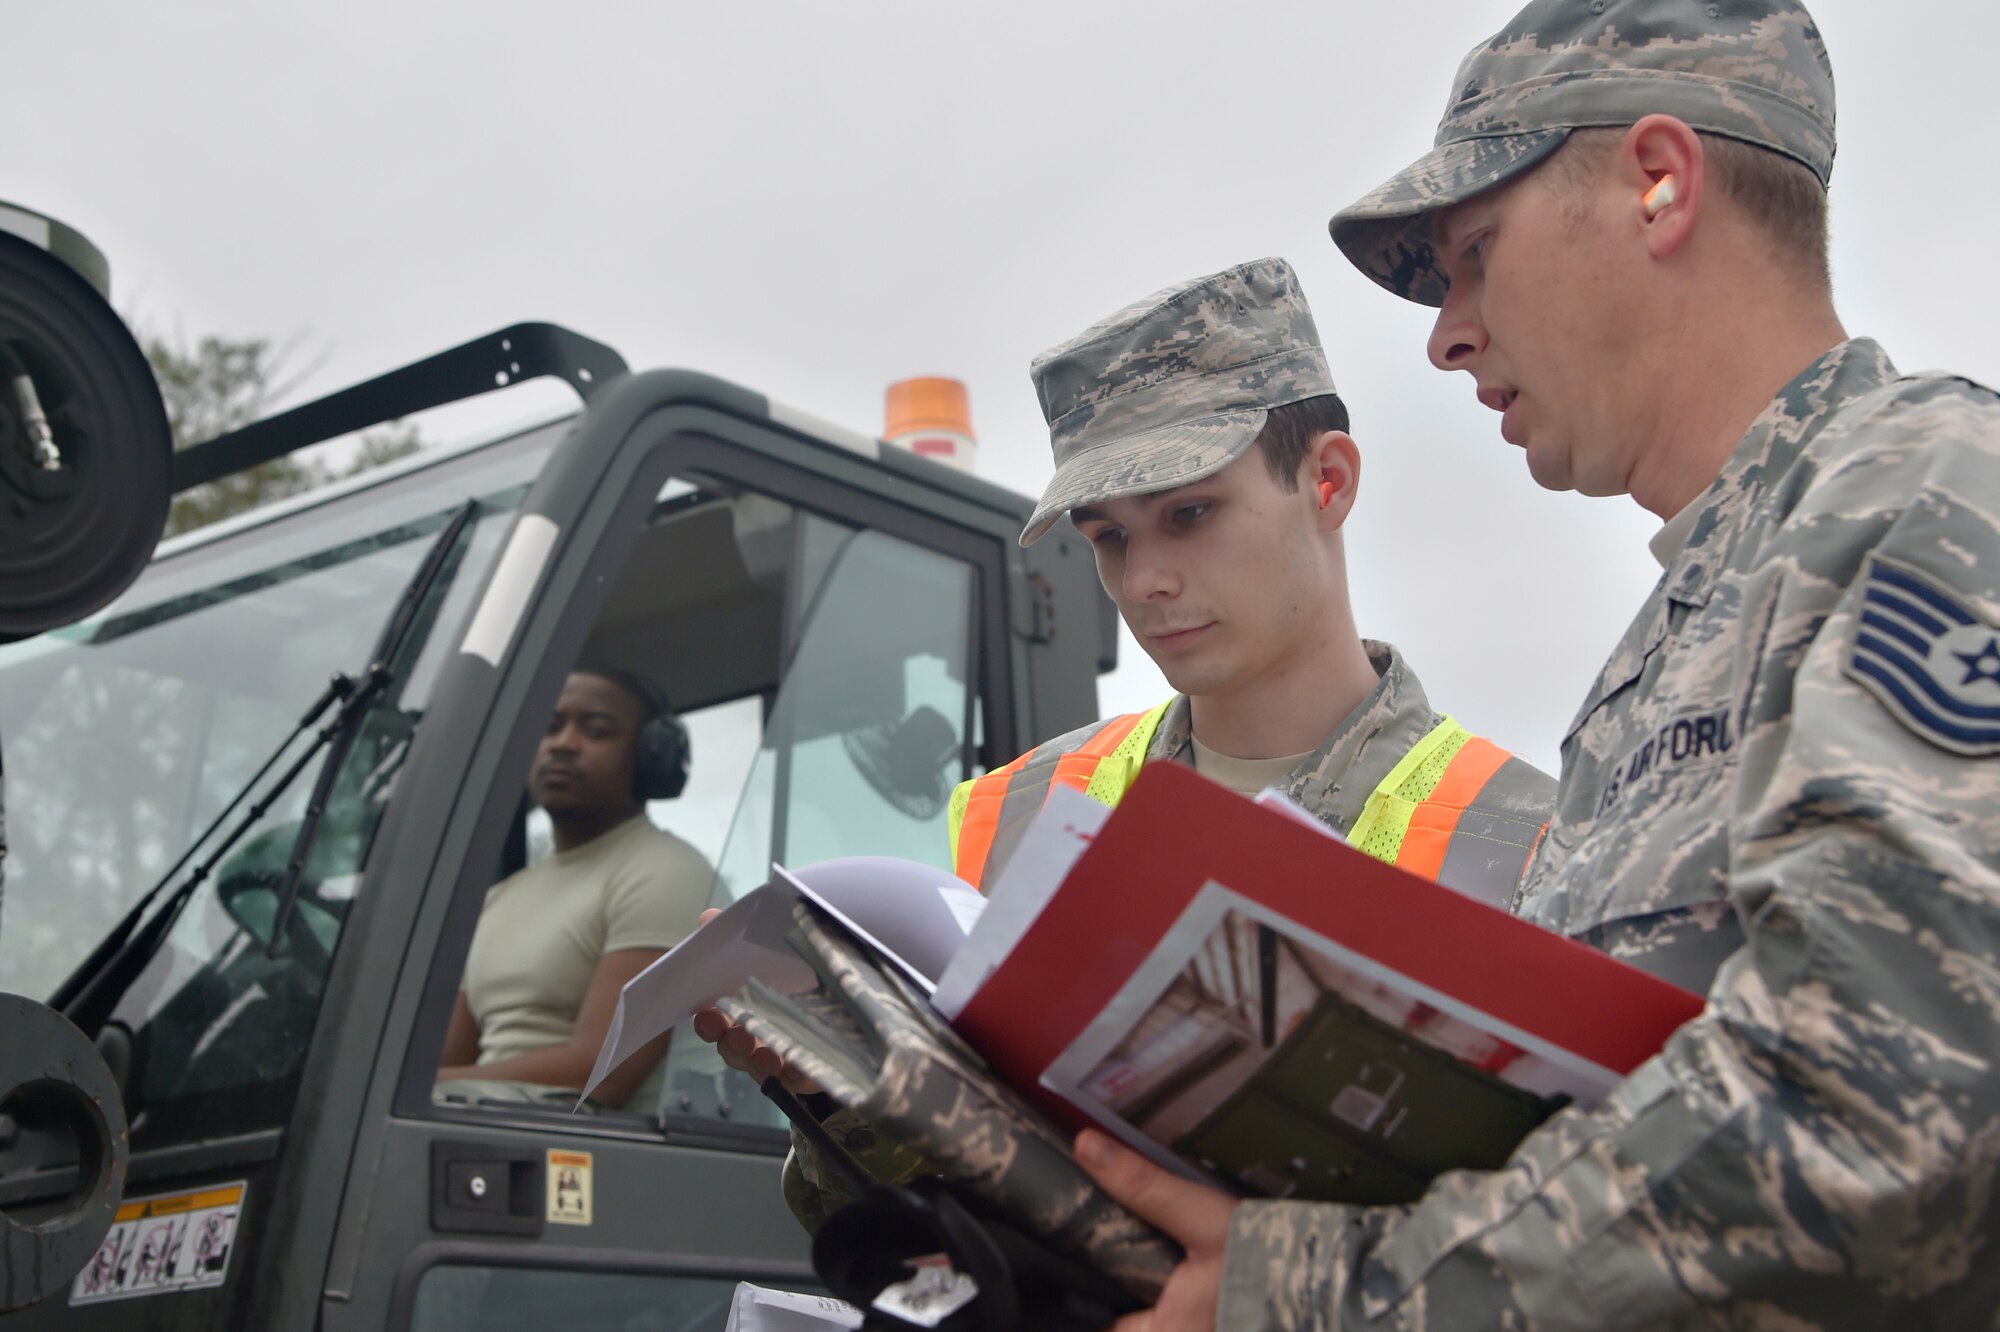 Airman 1st Class Tyler Connolly, center, 437th Aerial Port Squadron traffic management operations technician, and Tech. Sgt. Donovan Reid, right, 437th Aircraft Maintenance Squadron exercise chalk increment monitor, review a checklist during a simulated cargo inspection at a cargo deployment function as part of mobility exercise Bold Eagle Feb. 26, at Joint Base Charleston, S.C.